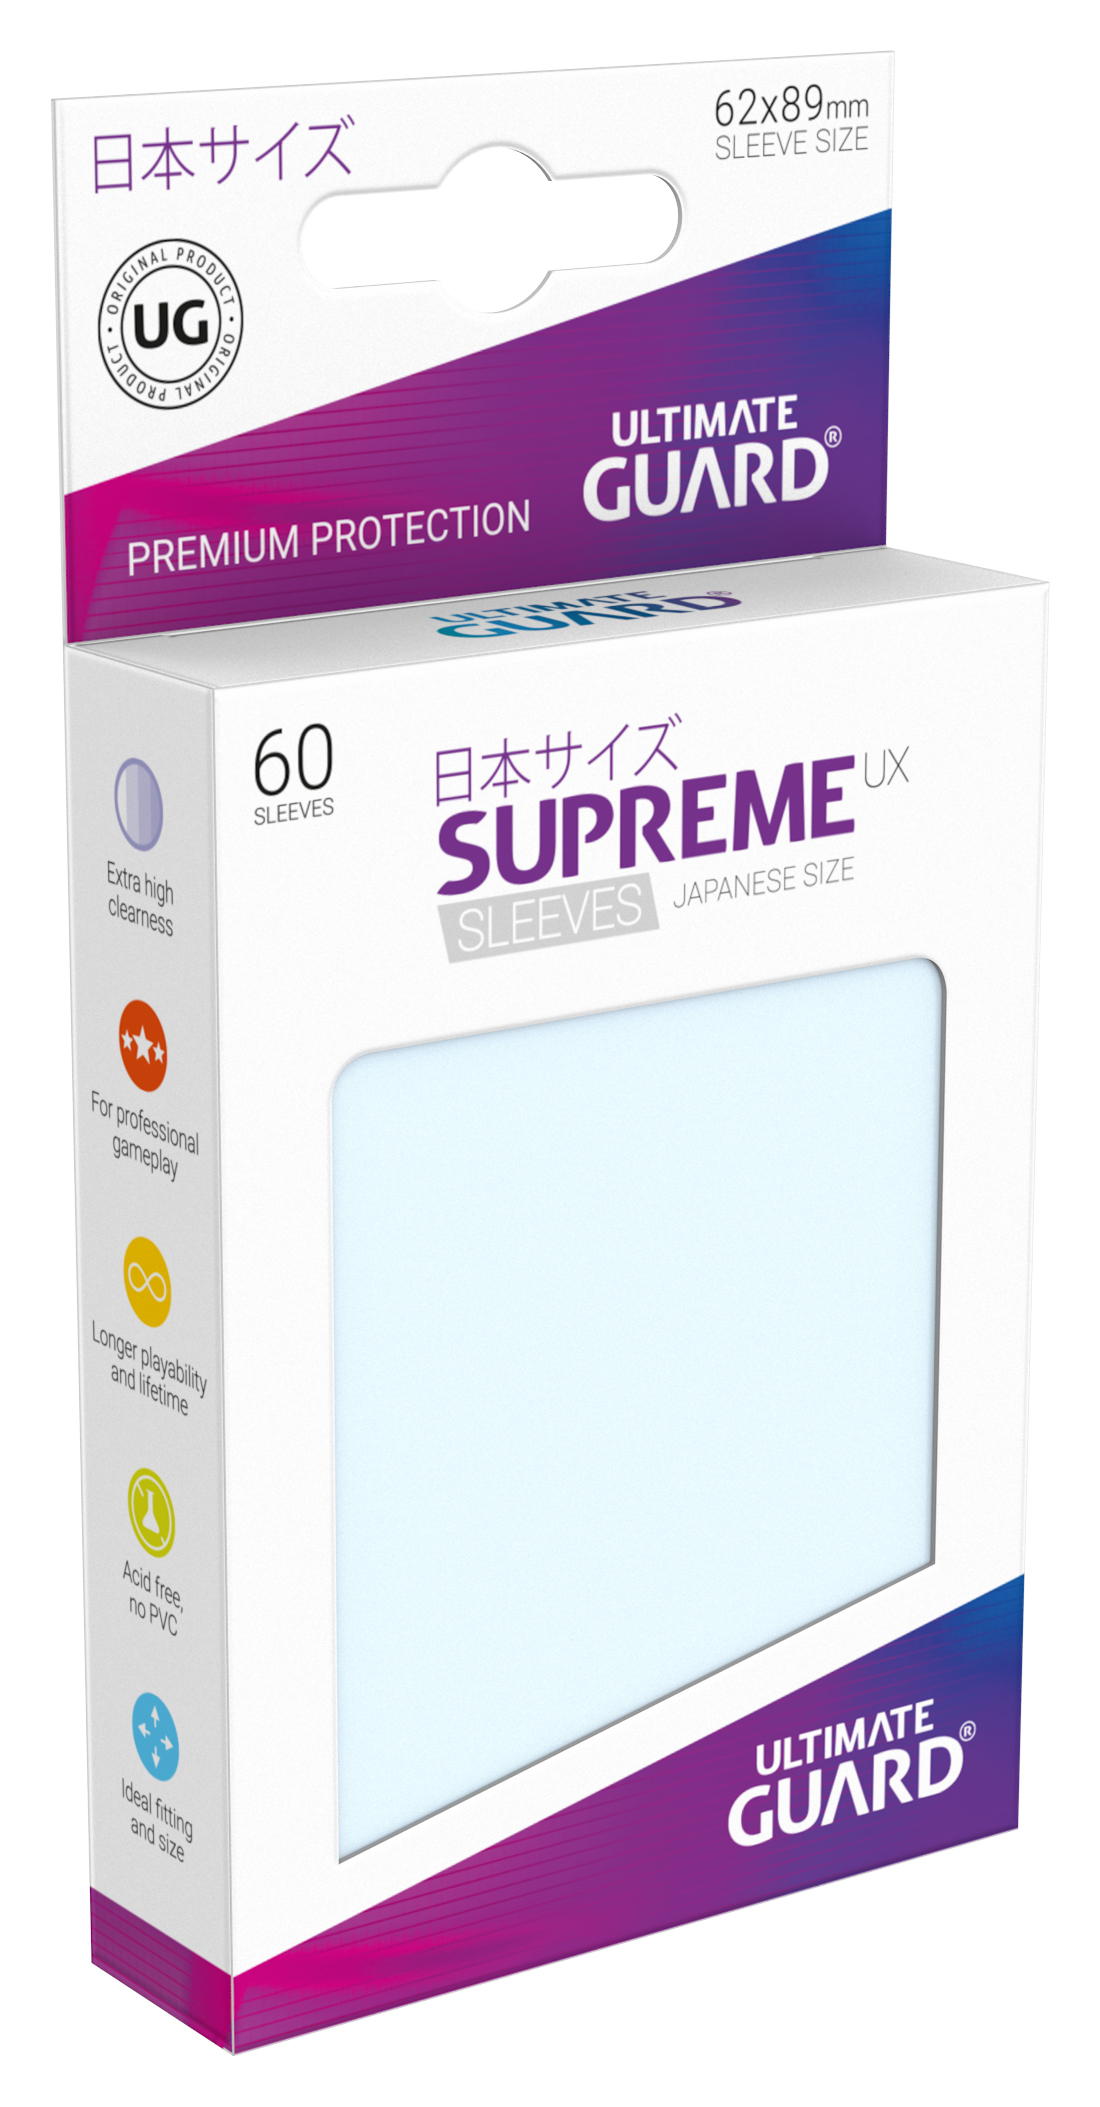 Ultimate Guard SUPREME UX Japanese Size Card Sleeves TRANSPARENT 60 